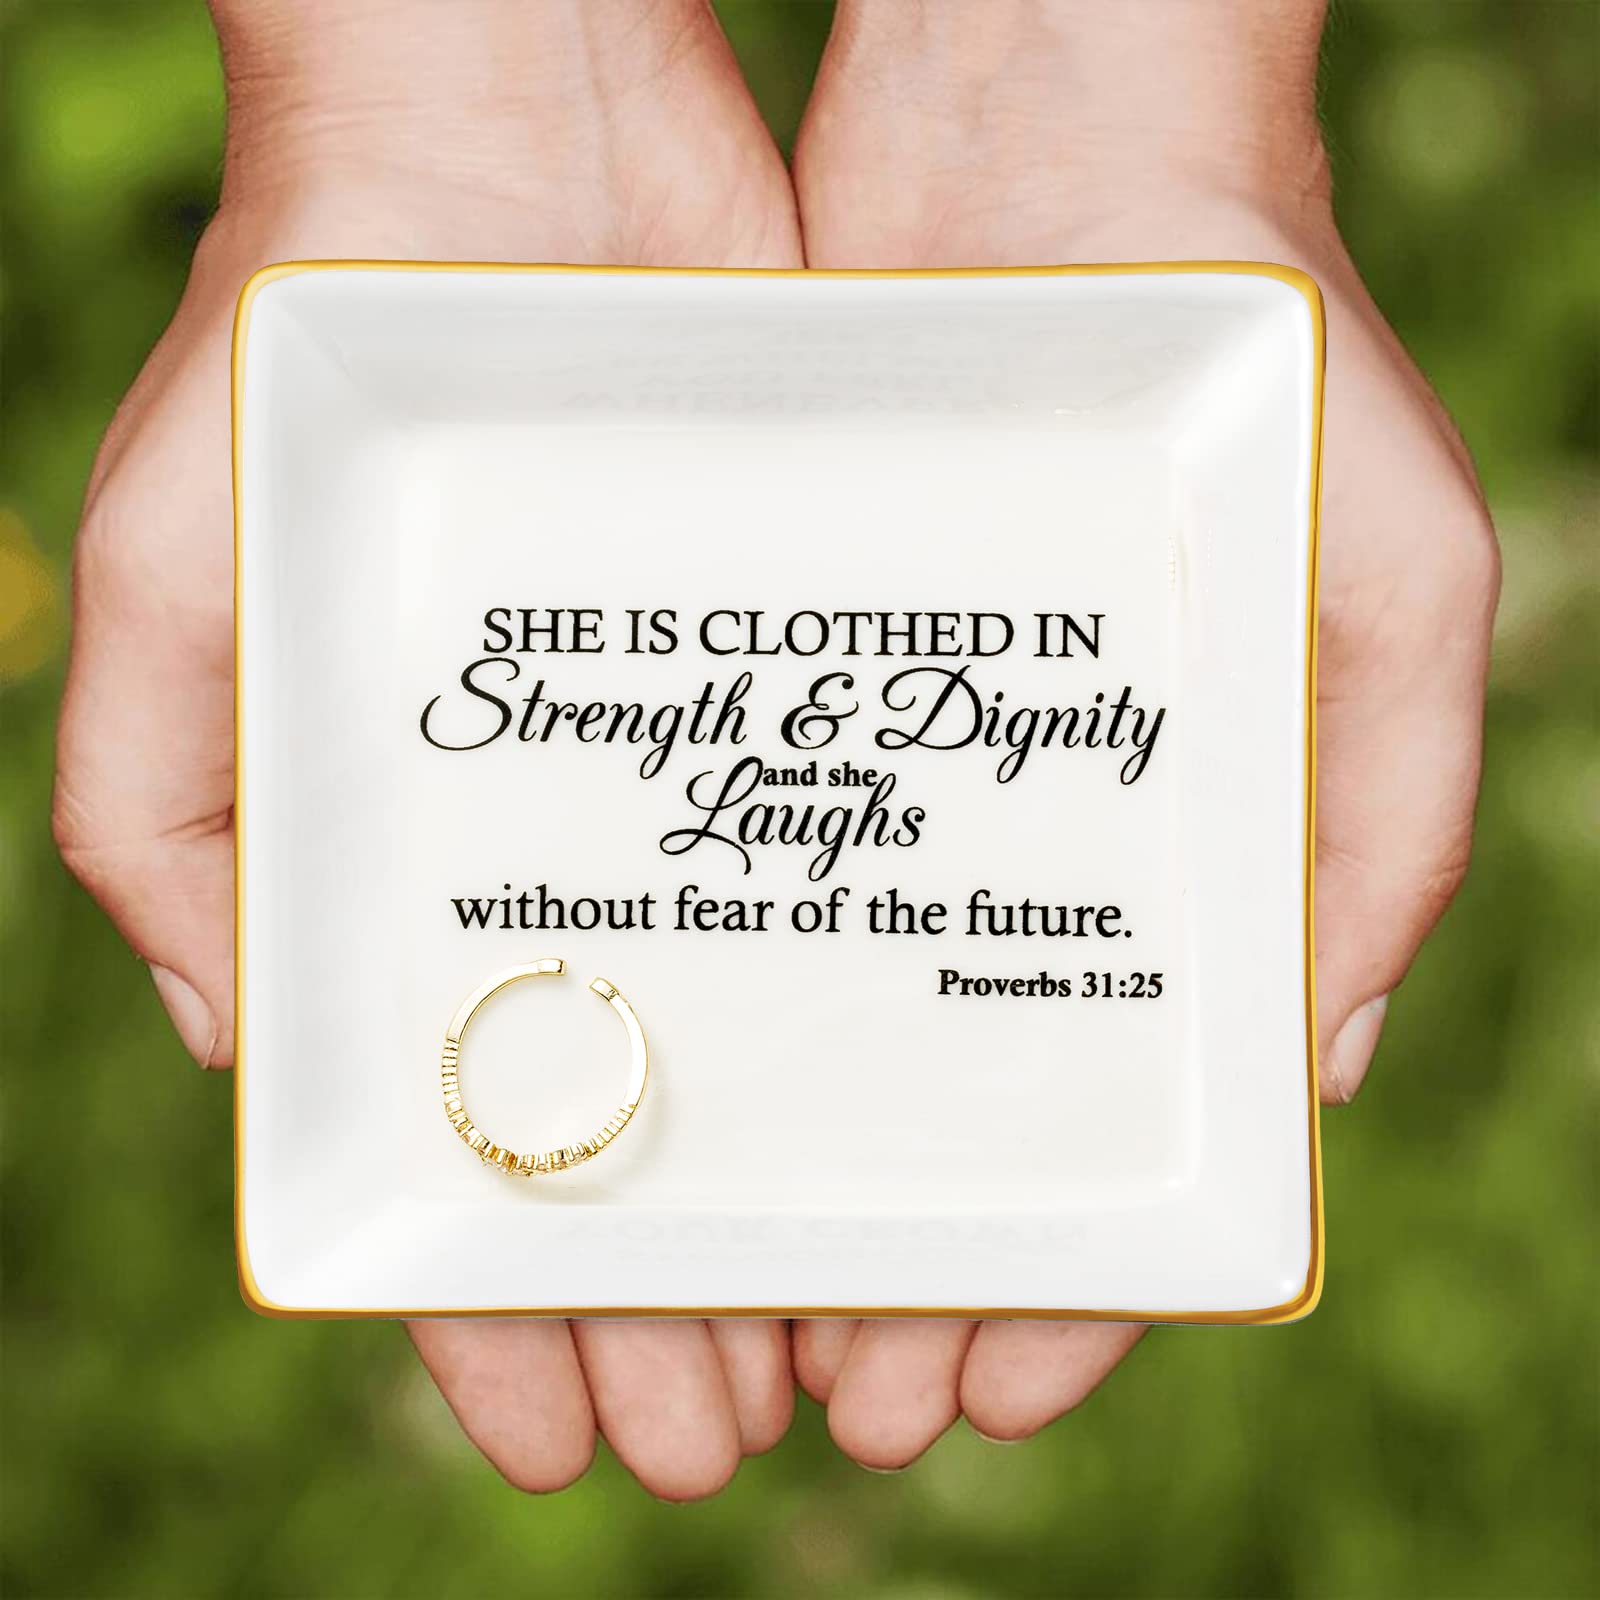 Inspirational Christian Gifts for Women Religious Gifts Ring Trinket Dish Encouragement Birthday Christmas Gifts for Daughter Sister Friend Daughter Home Decor